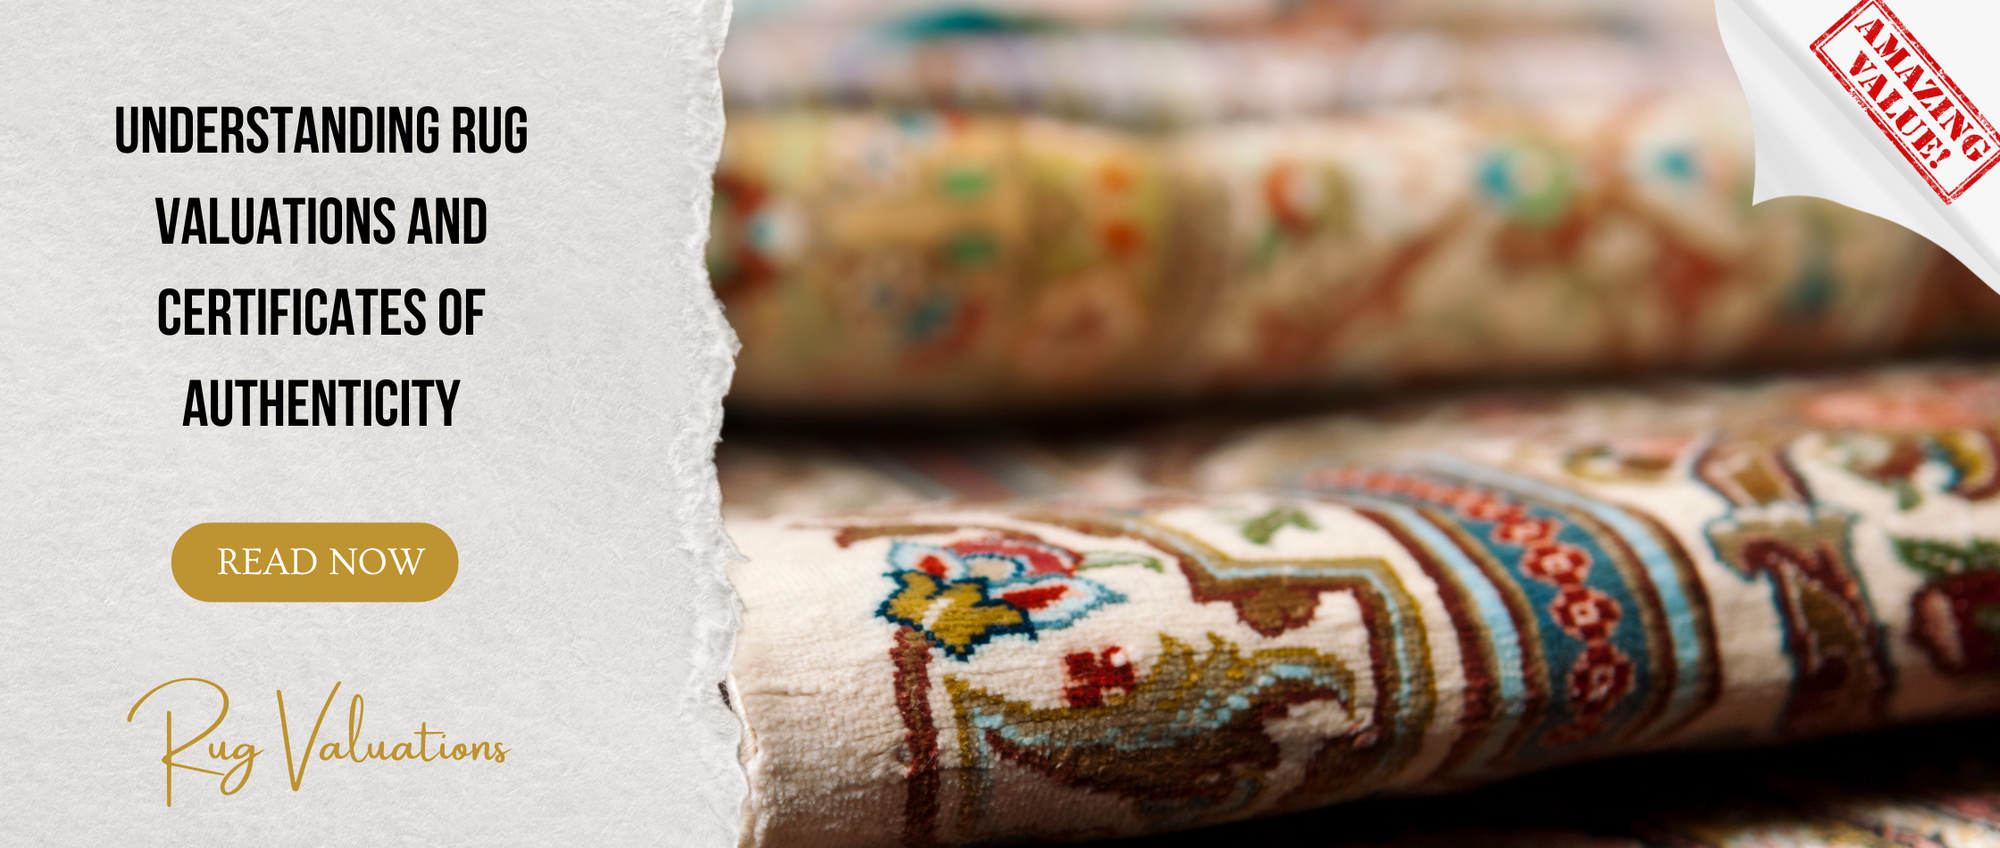 Understanding Rug Valuations and Certificates of Authenticity